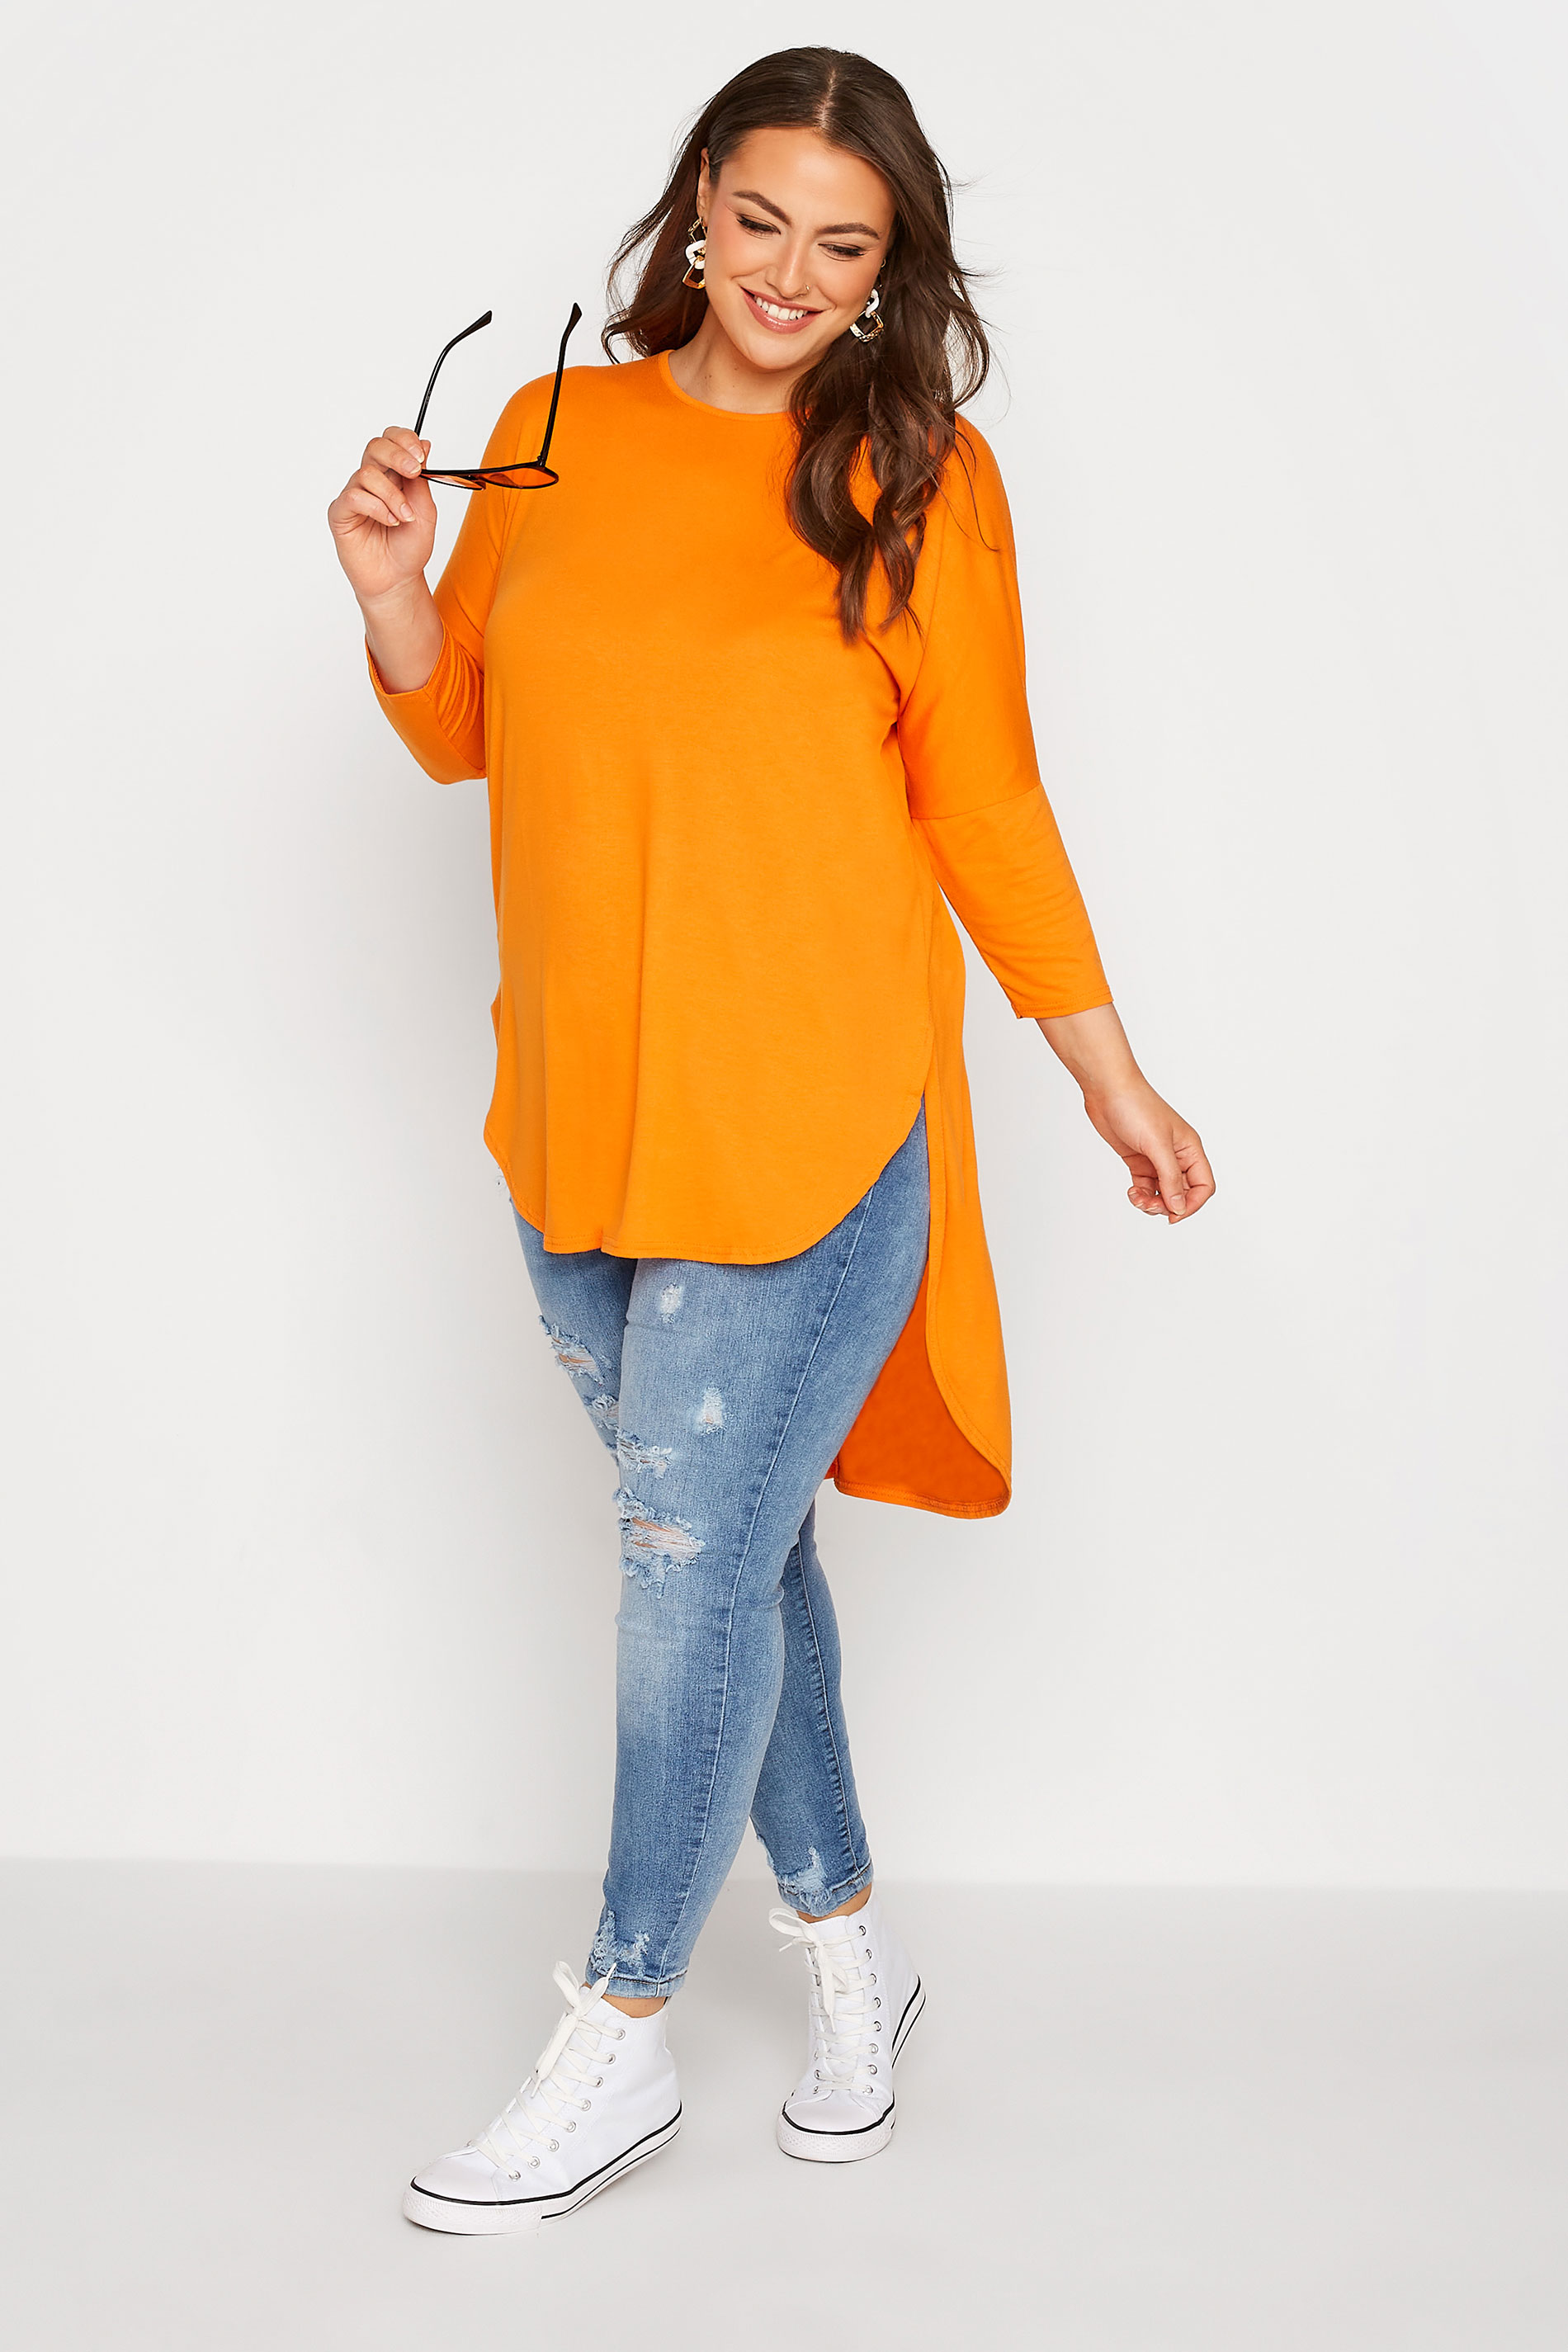 Grande taille  Tops Grande taille  Tops Ourlet Plongeant | LIMITED COLLECTION - T-Shirt Orange Manches Longues Ourlet Plongeant - YB23532